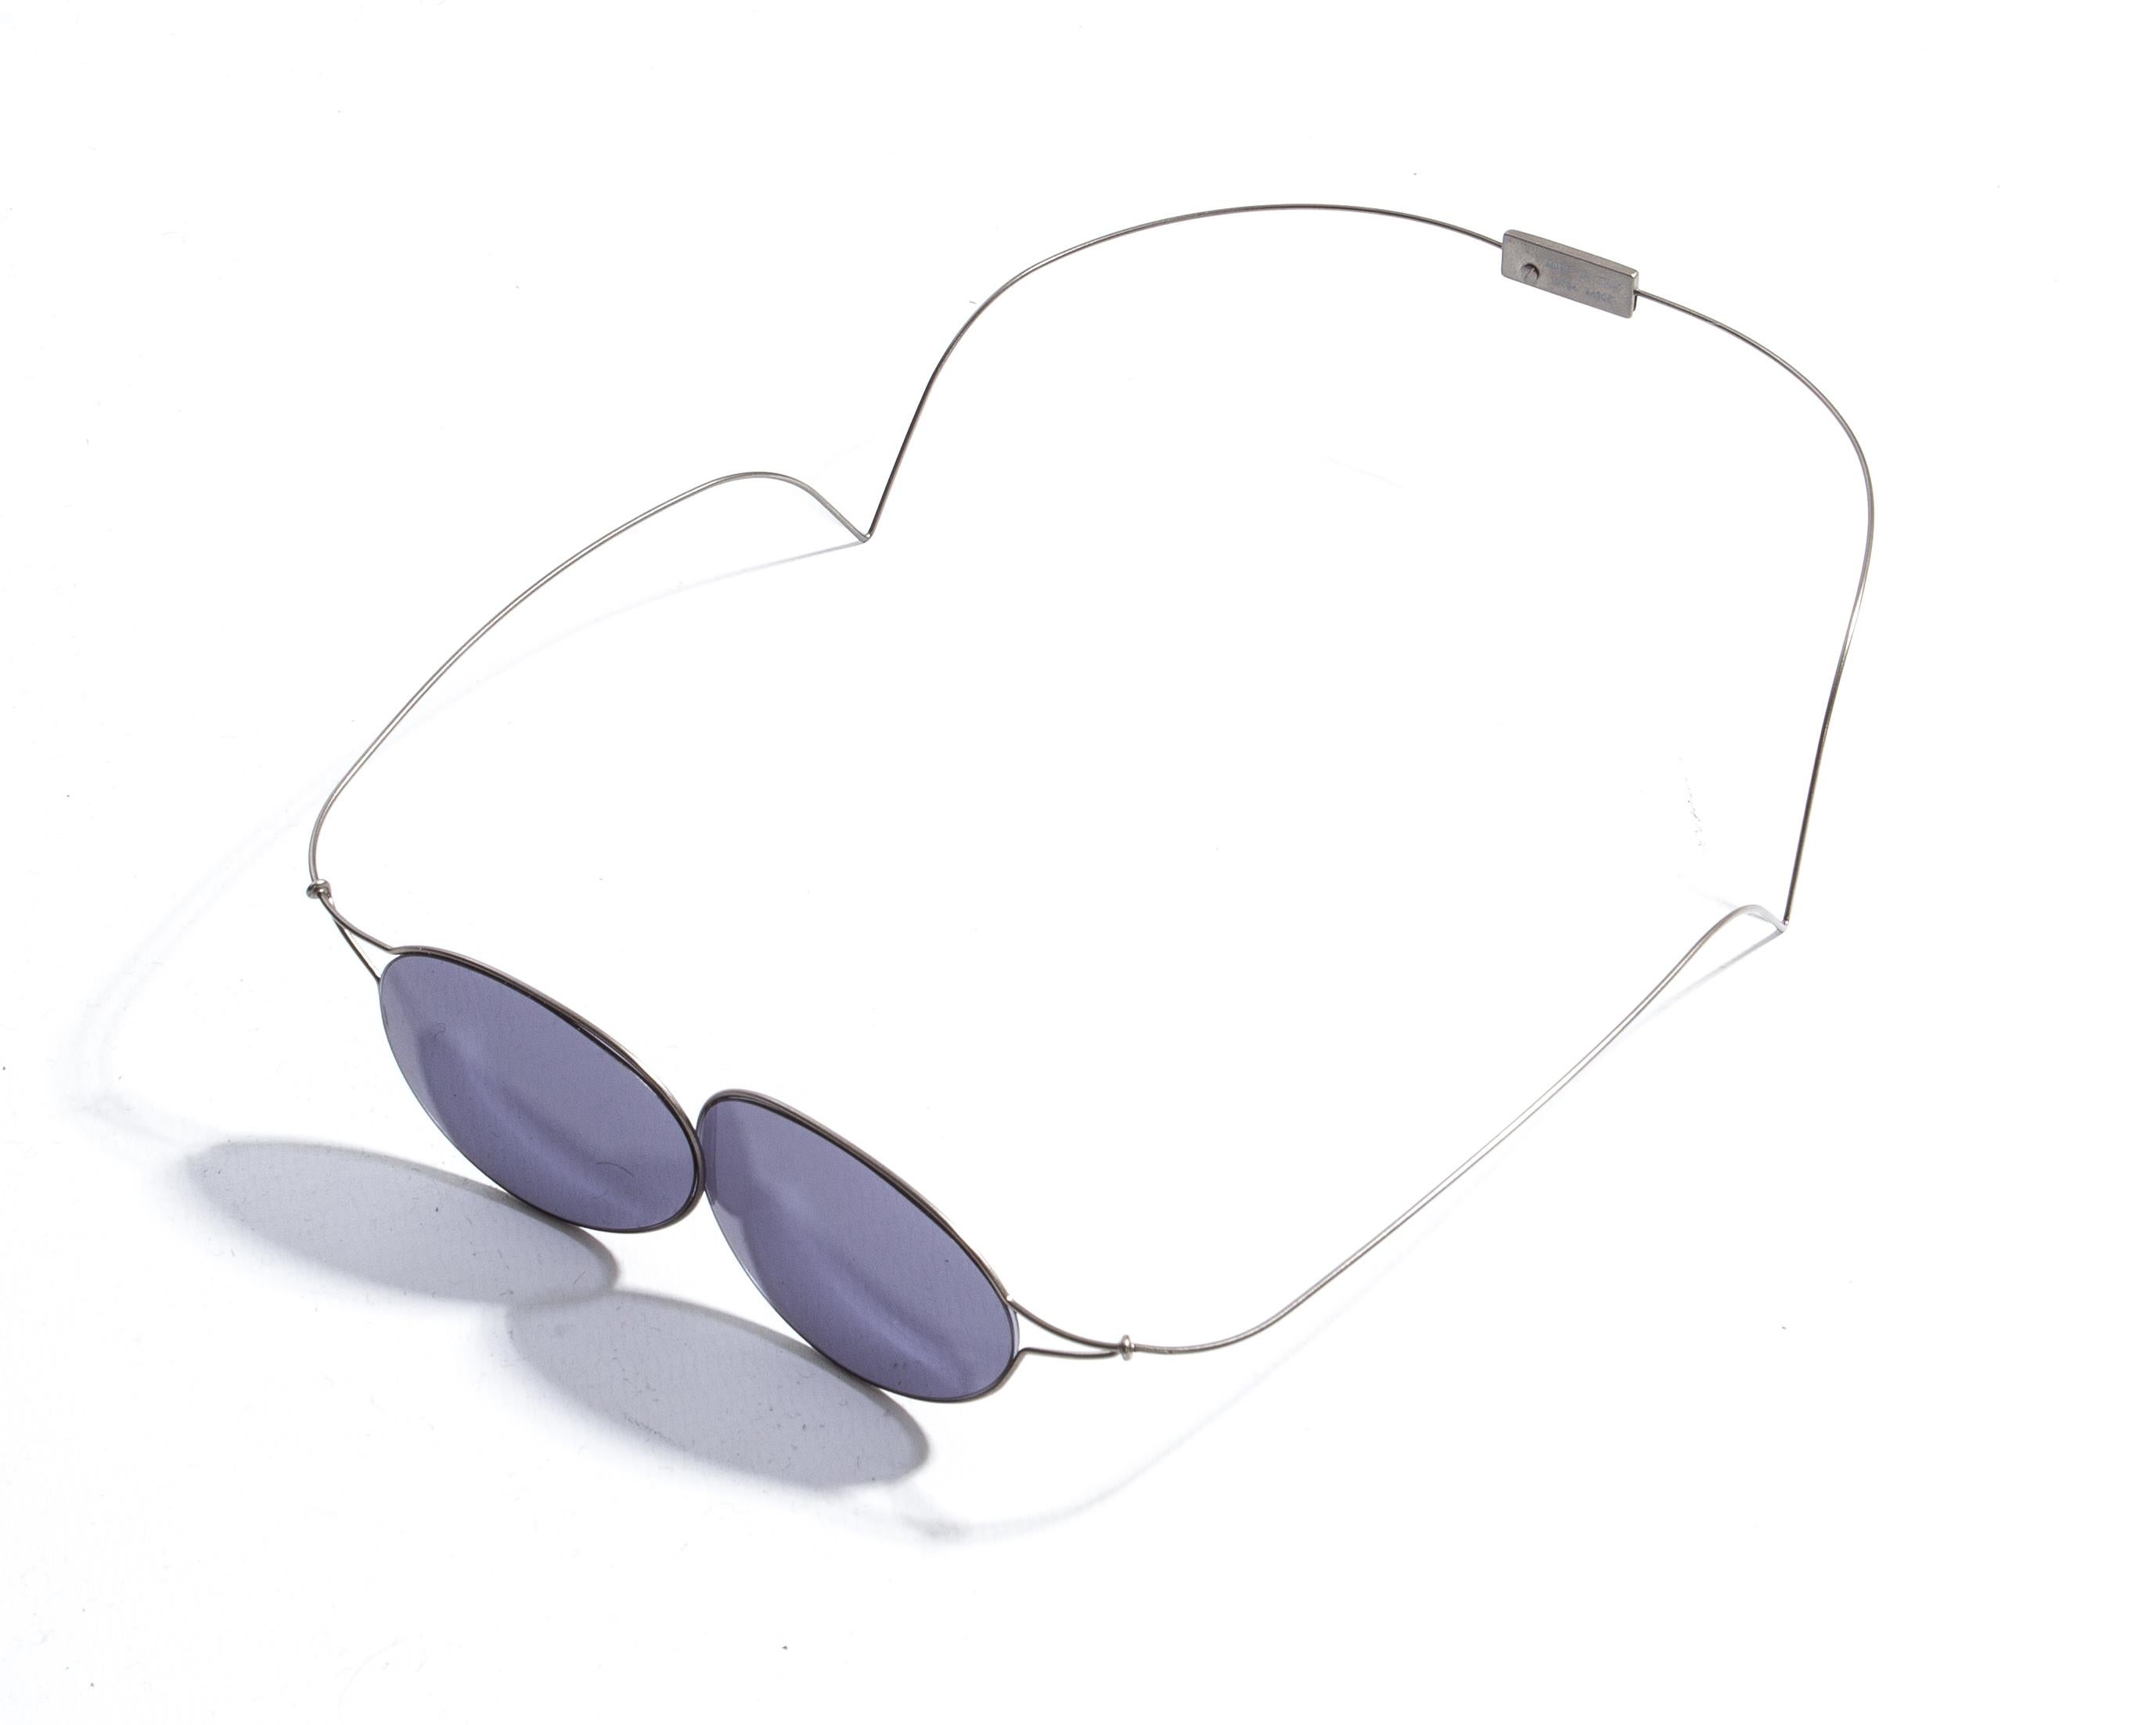 Chanel by Karl Lagerfeld; 'Double Monocle' sunglasses for sunbathing. Feather light, the wrap-around wire arms hug the head. Black monocle style lenses.

Spring-Summer 1999

'Some remain skeptical as to whether these groundbreaking sunglasses will